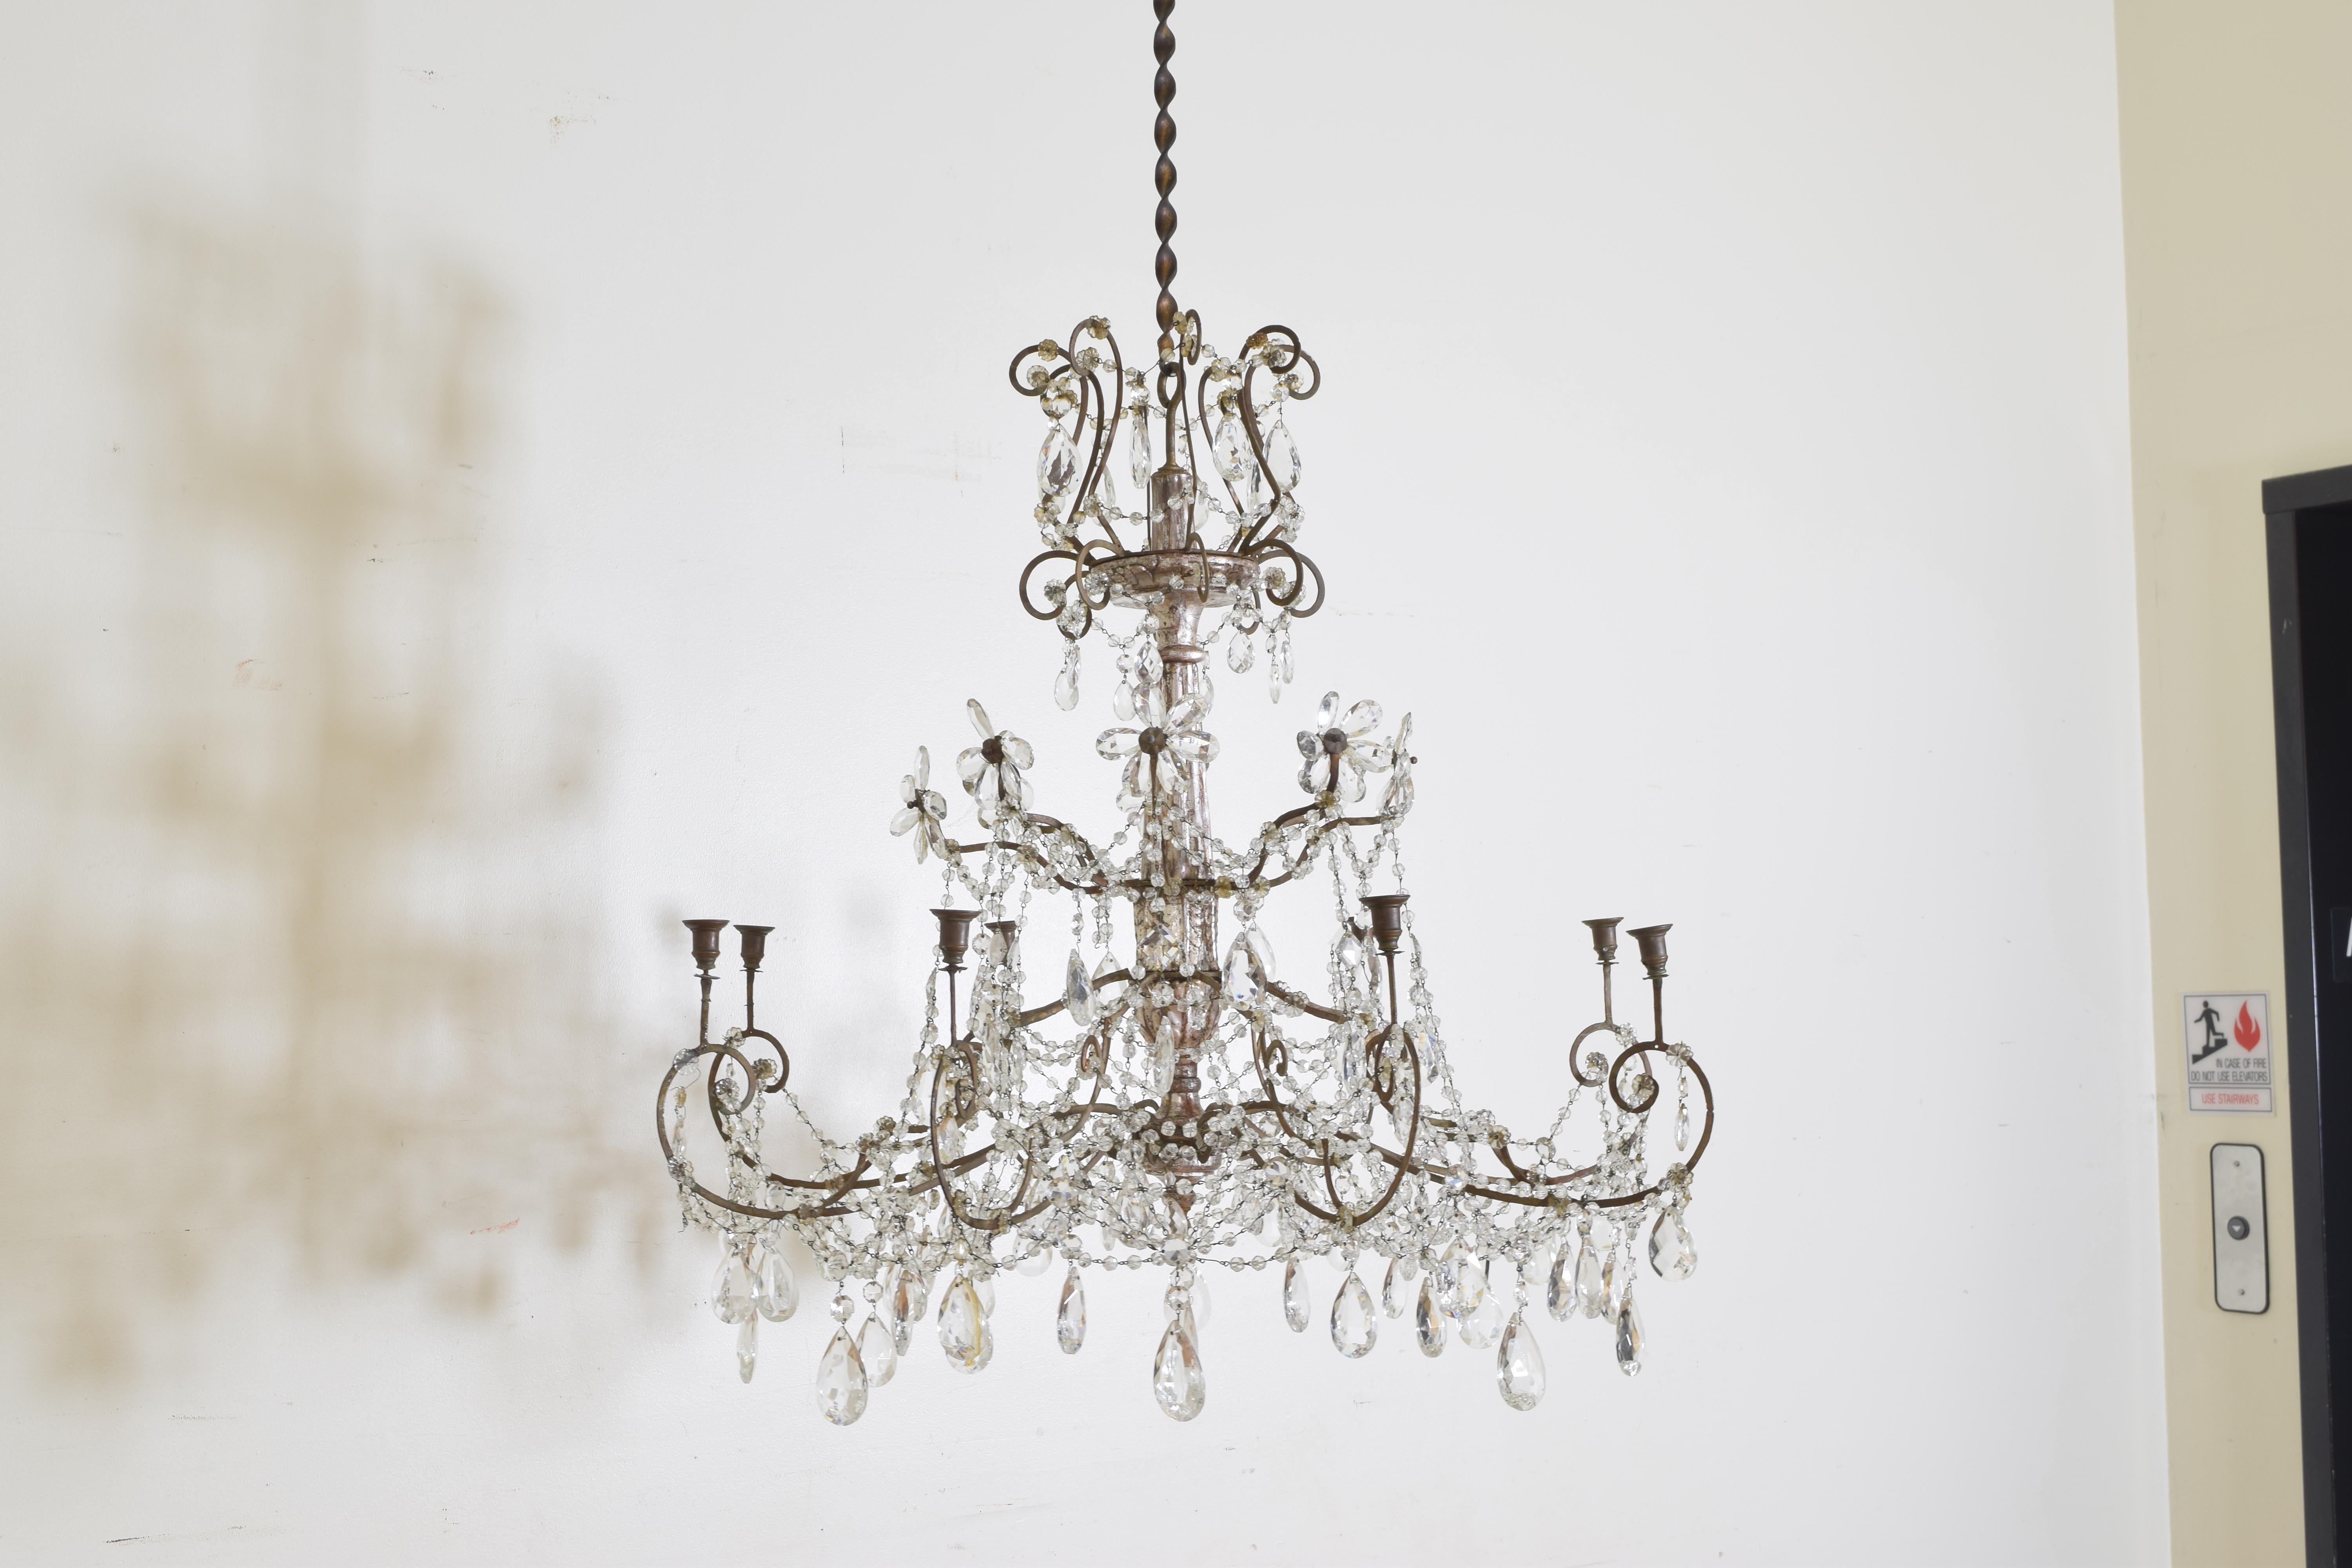 Having four distinct tiers of scrolling ironwork, the scrolls connected by segmented glass bead chain with hanging prisms, the central standard is silver gilded wood and is divided among the tiers, the lowest tier with shaped arms and small